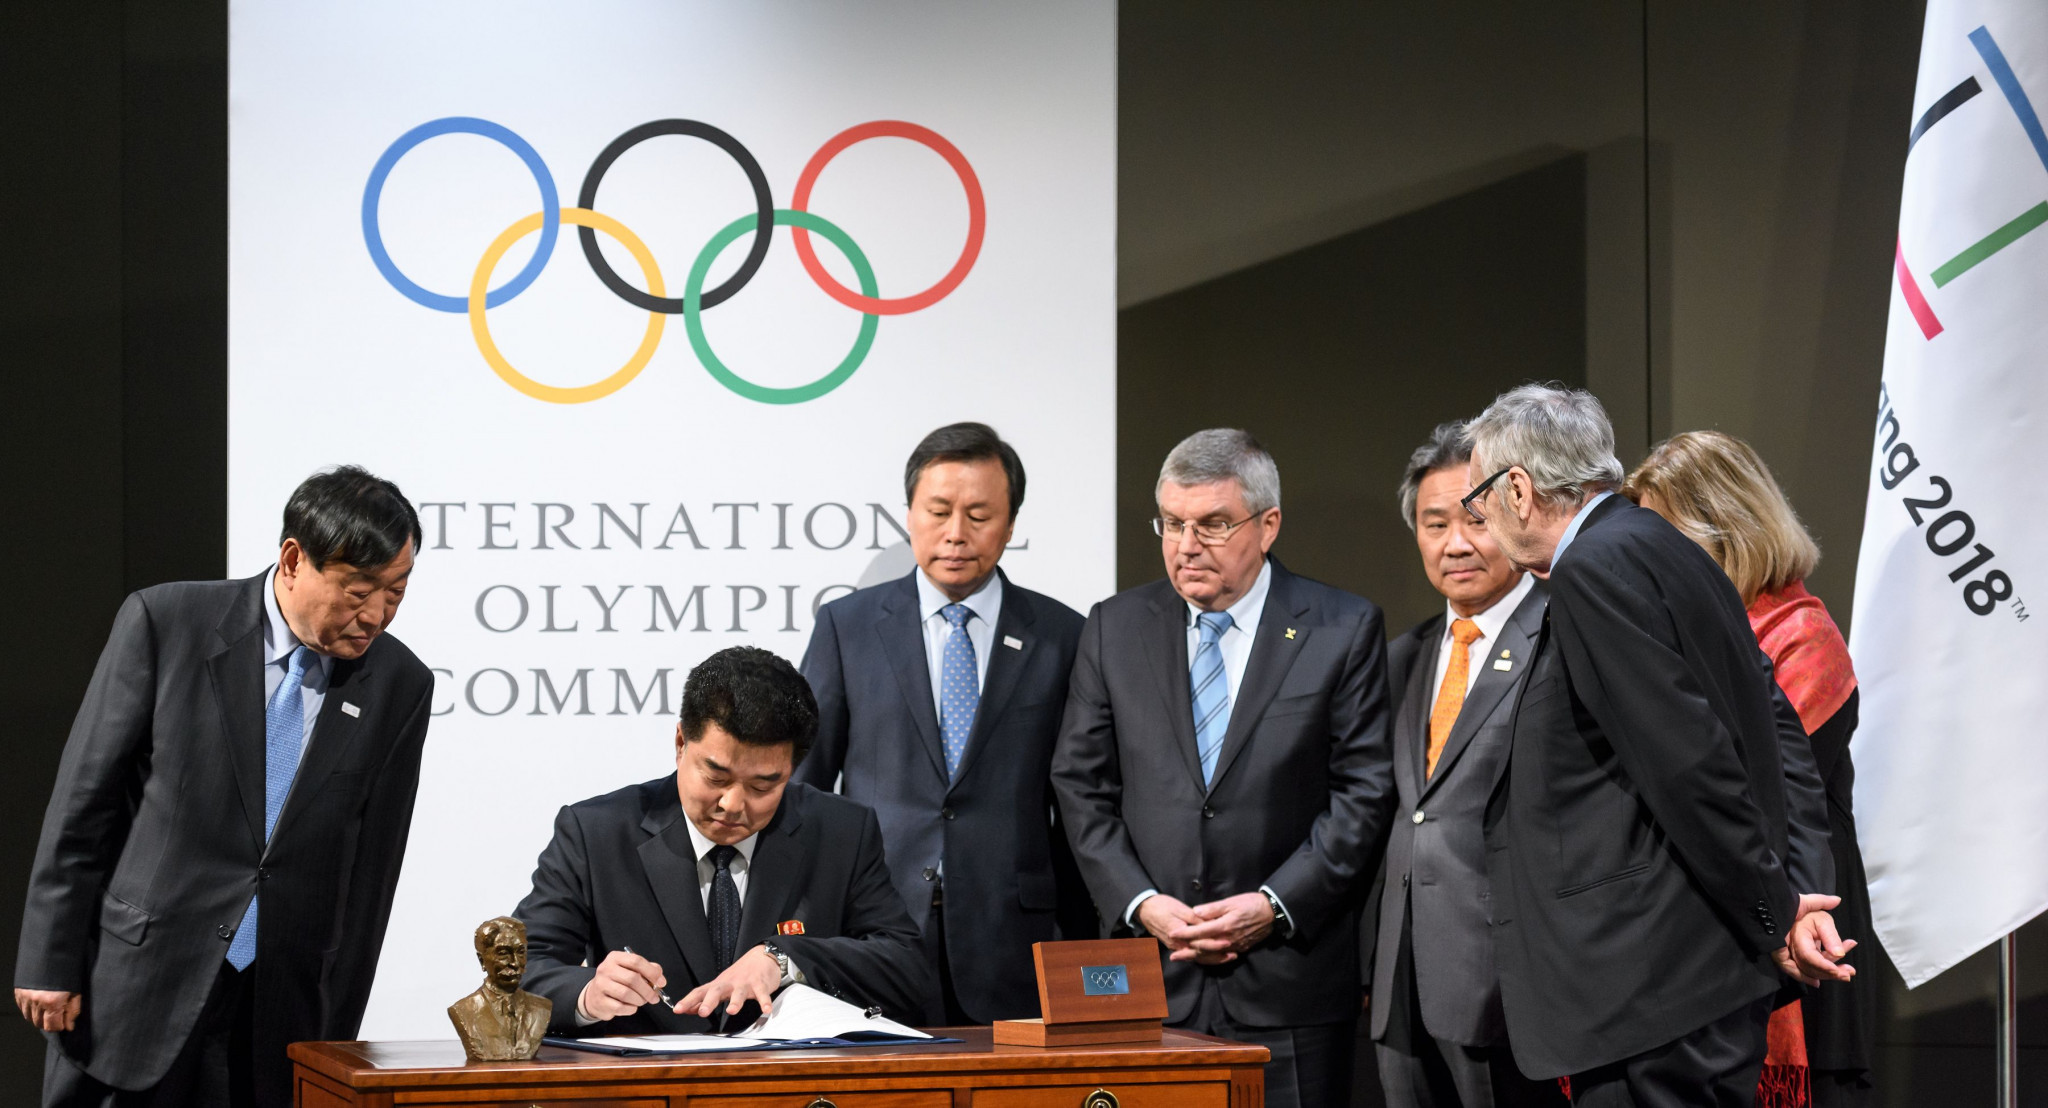 Thomas Bach, fourth left, pictured with representatives from North and South Korea signing their Olympic participation deal for Pyeongchang 2018 in Lausanne in January ©Getty Images